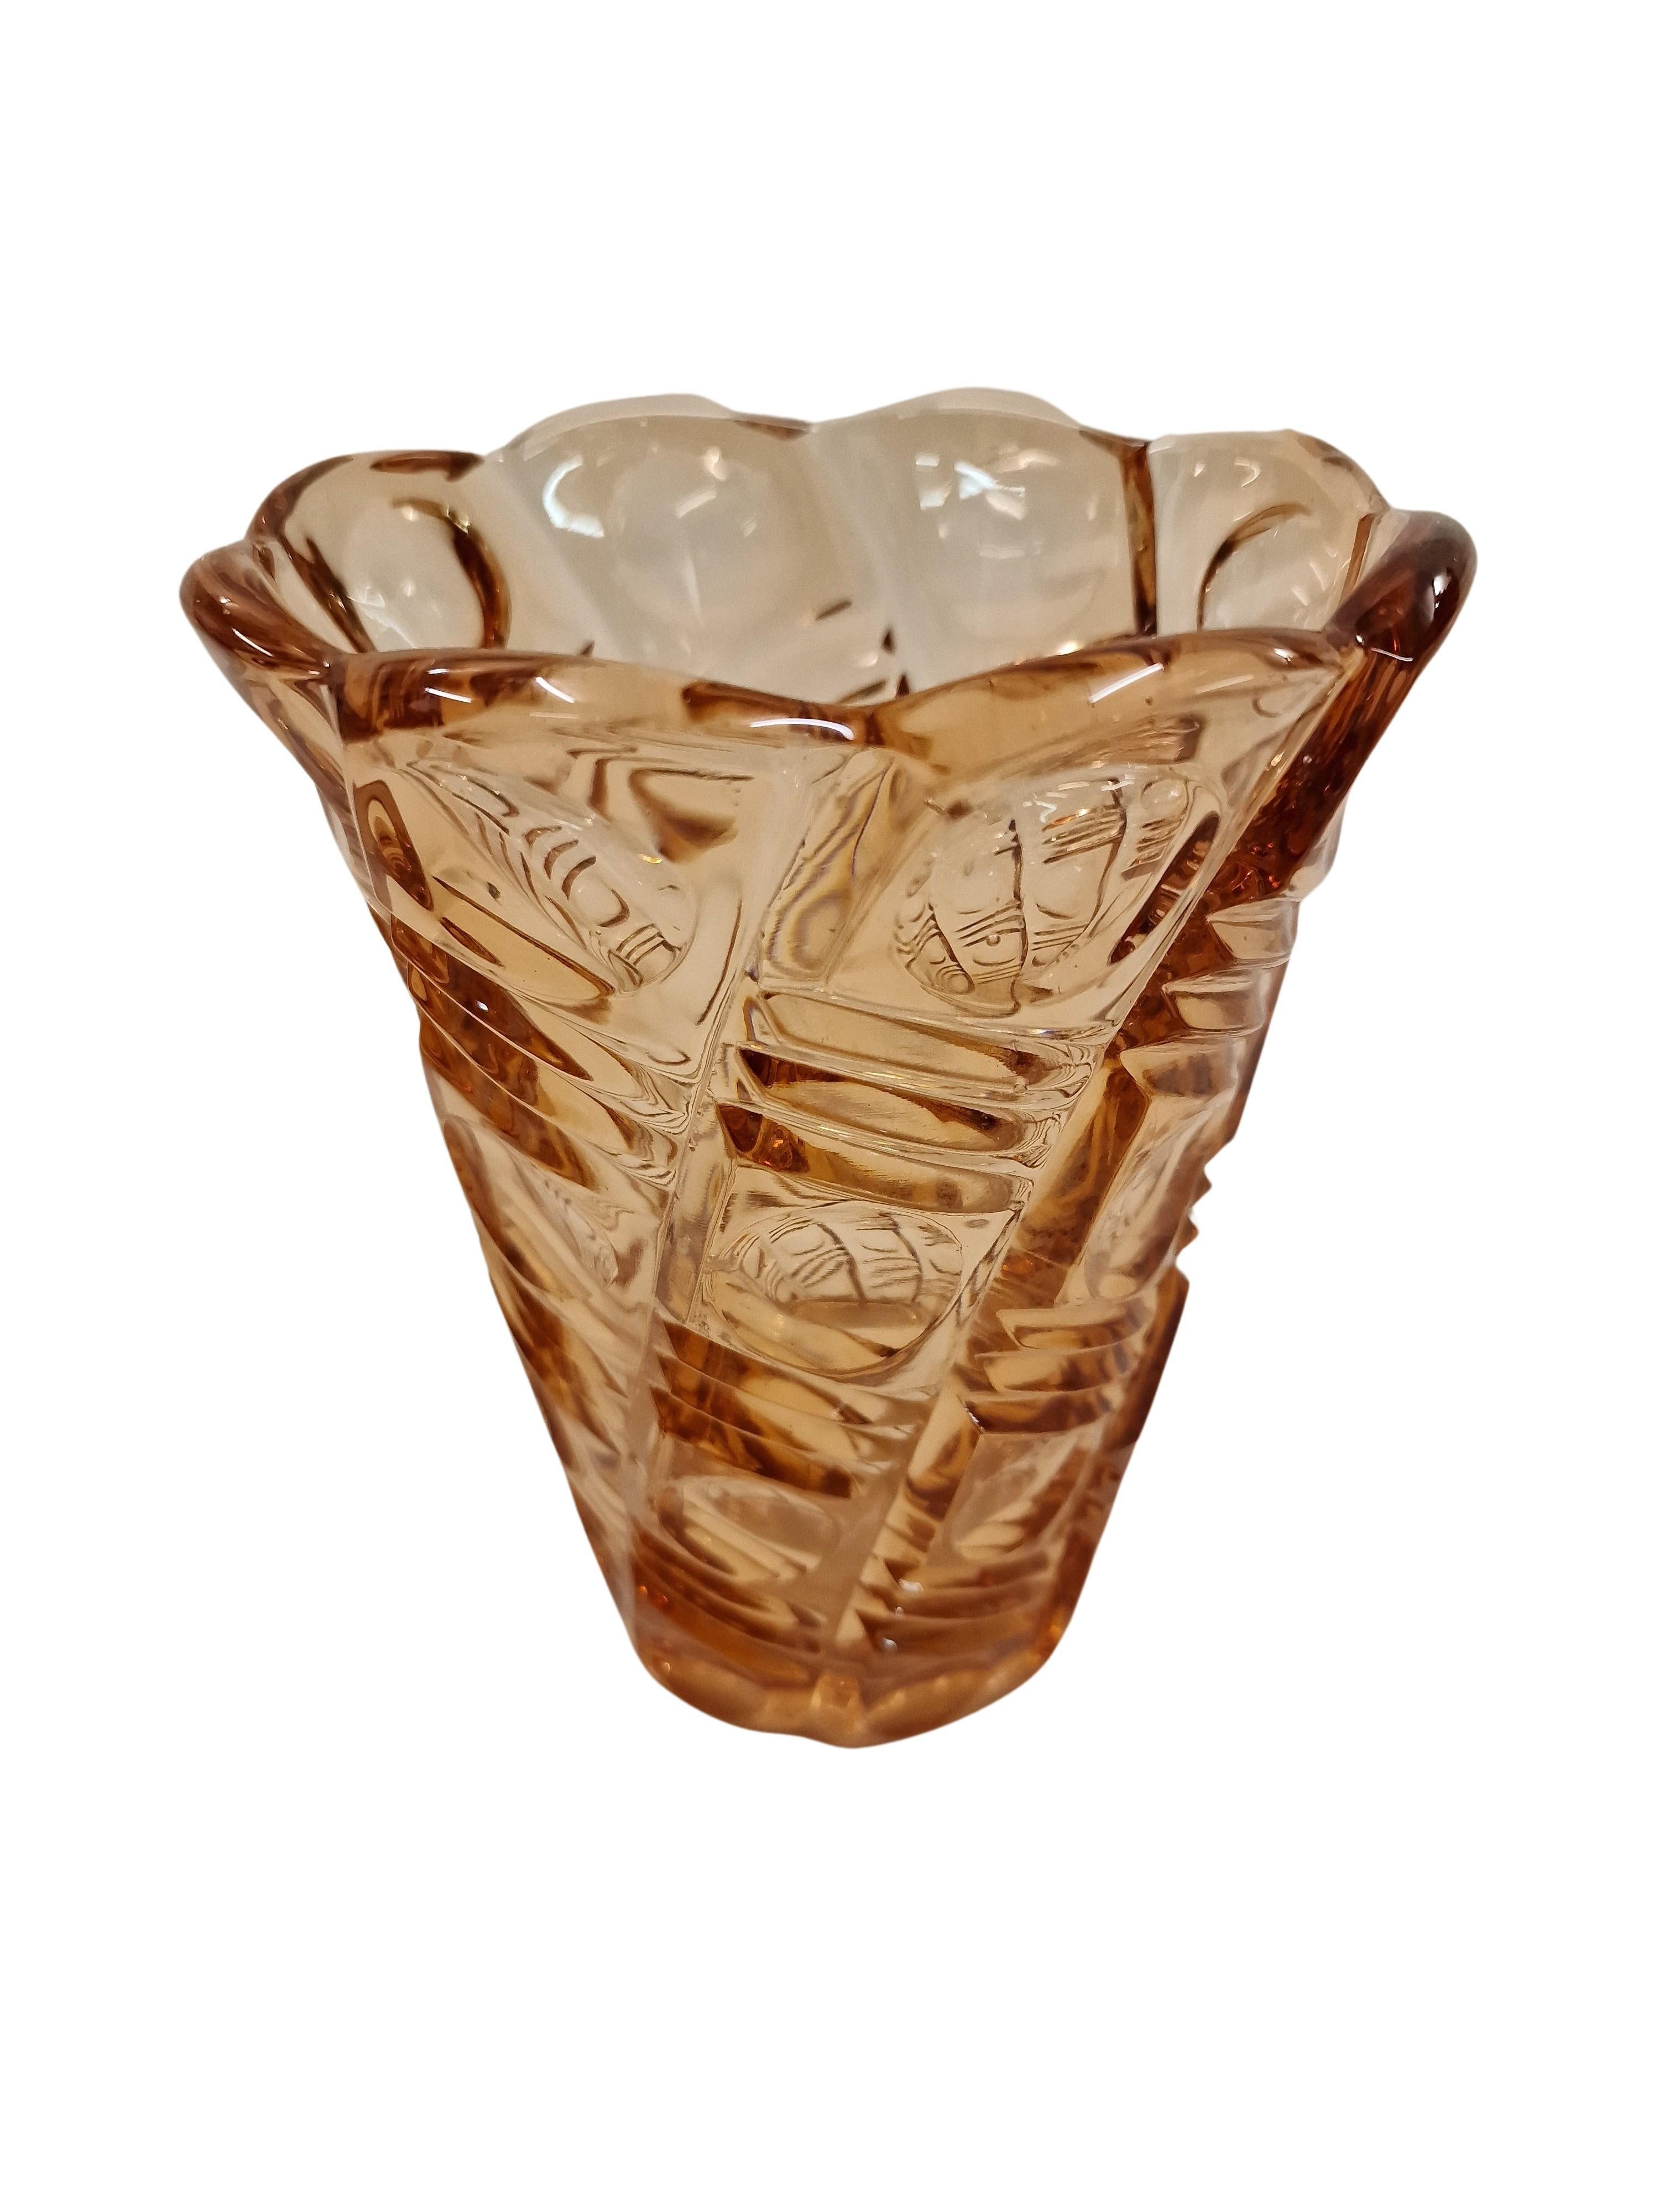 An extremely decorative flower vase, an original from the Art Deco period, made in the 1920s in Bohemia, Czech Republic. 

The vase has a round base, which then extends upwards in a rectangular structure and then ends again in a blossom like outlet.